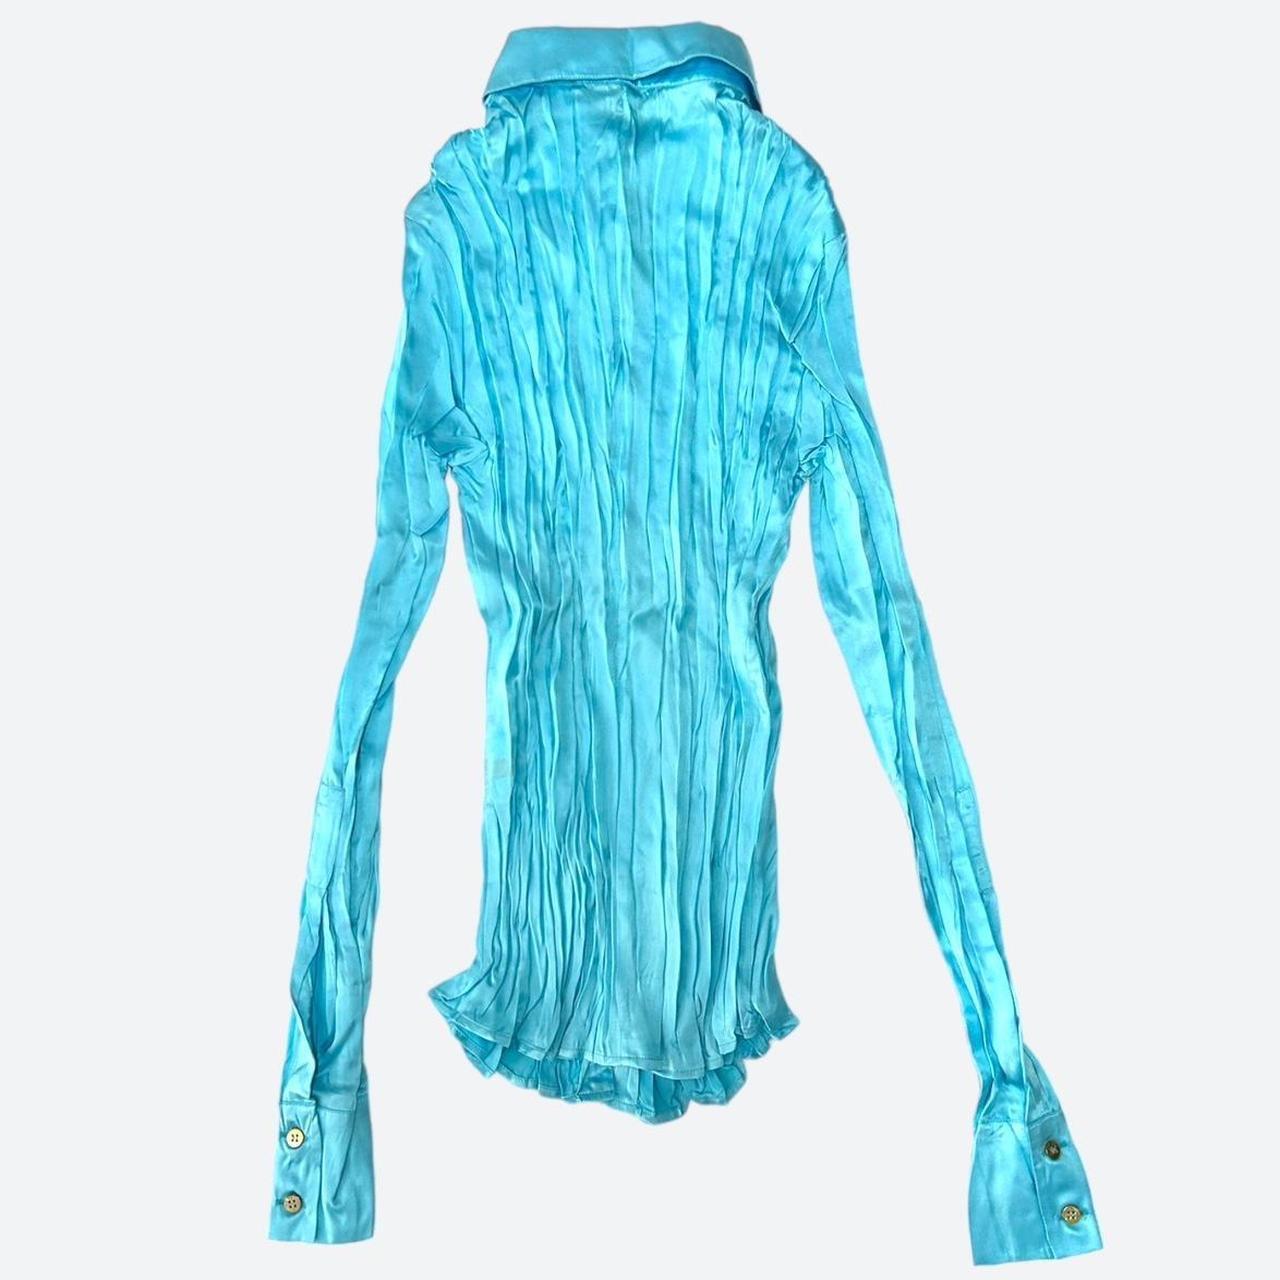 This 100% silk shirt in vibrant aqua blue has a unique pleated finish that adds texture to the rich glossy look of the silk, as well as some edge to the sophisticated style of this item.

The XS sized shirt is done up at the front in gold color